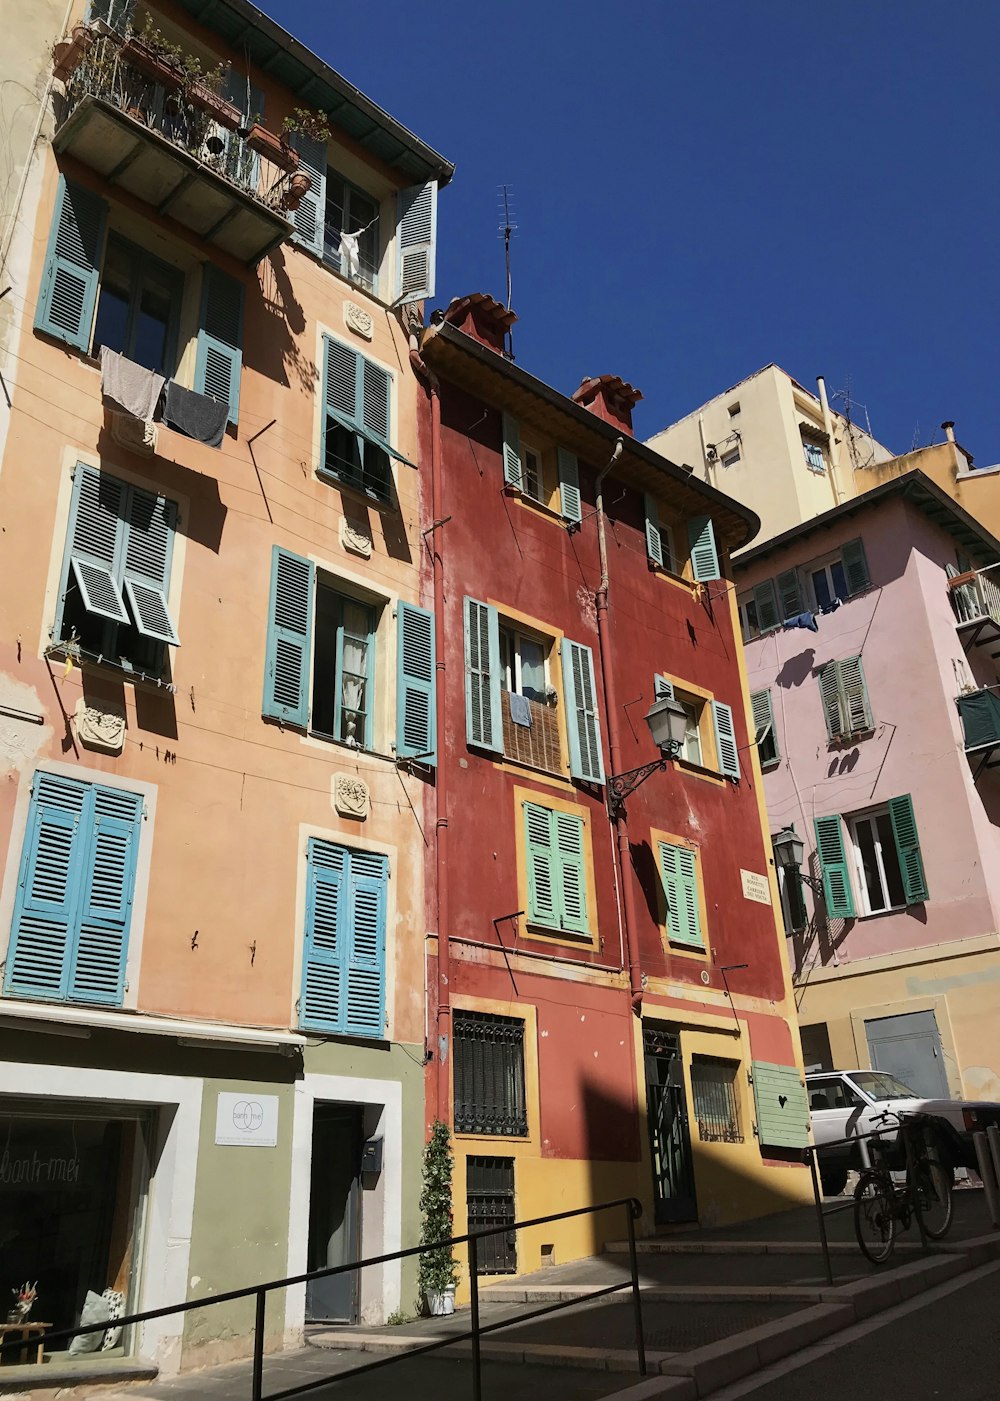 a row of buildings with blue shutters on the windows